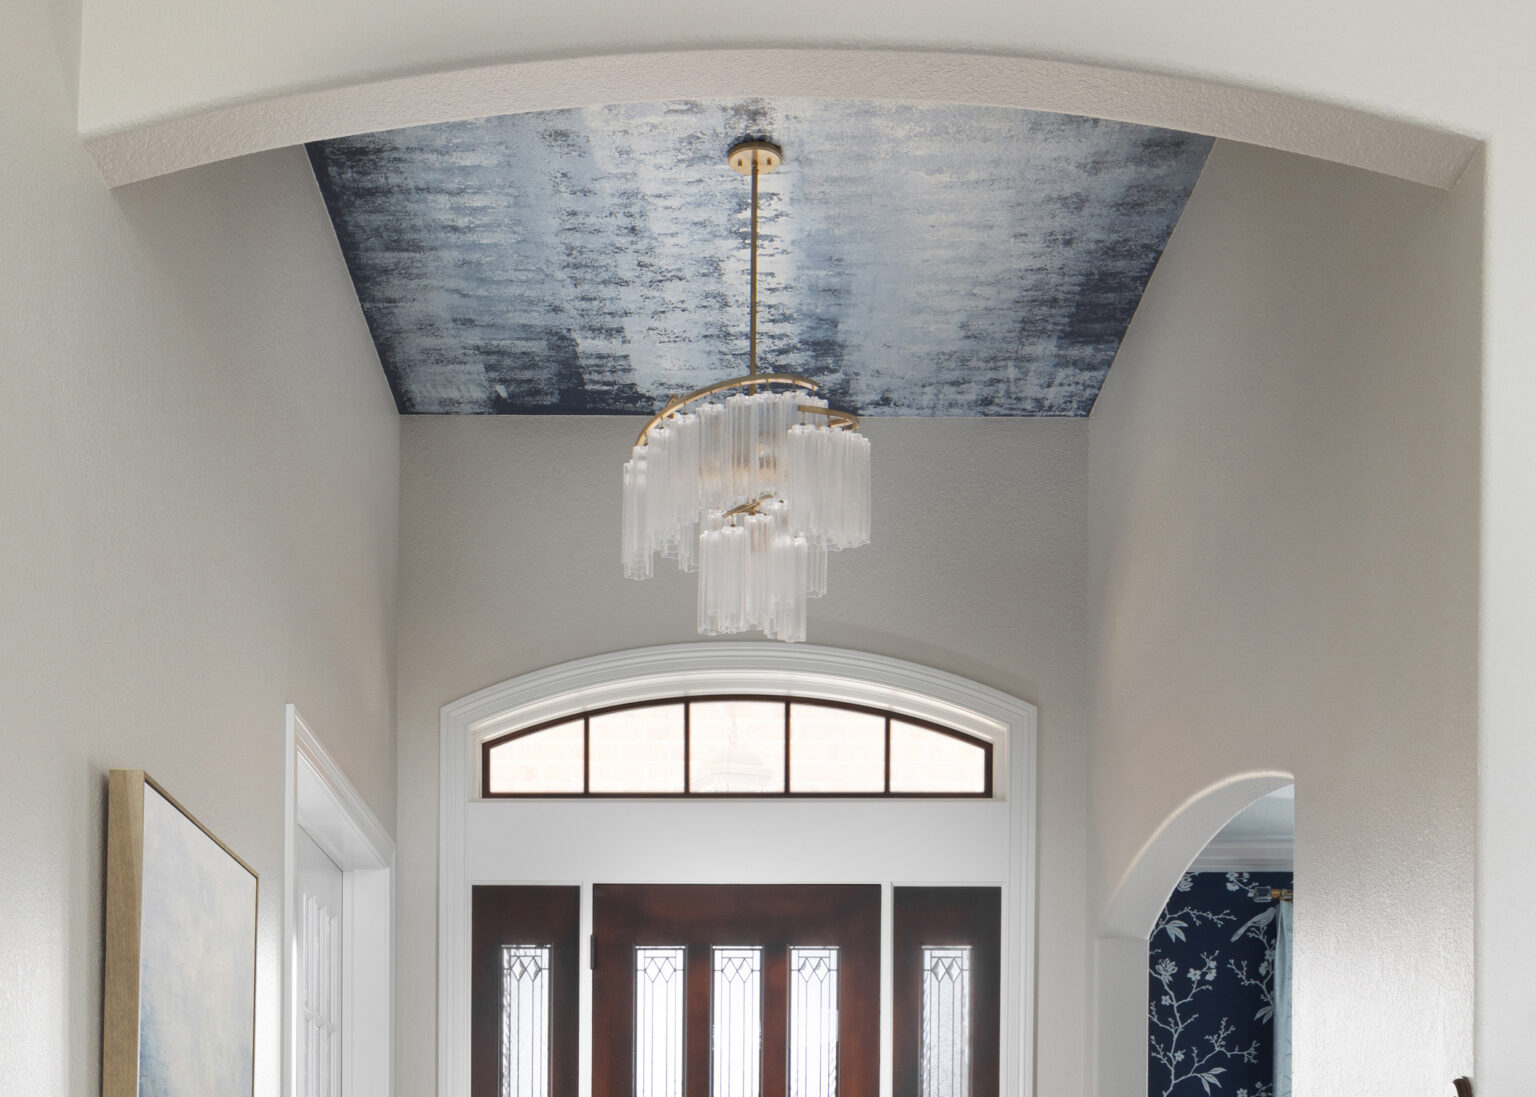 Wallpaper on the ceiling can be a creative way to add drama and interest to a room.